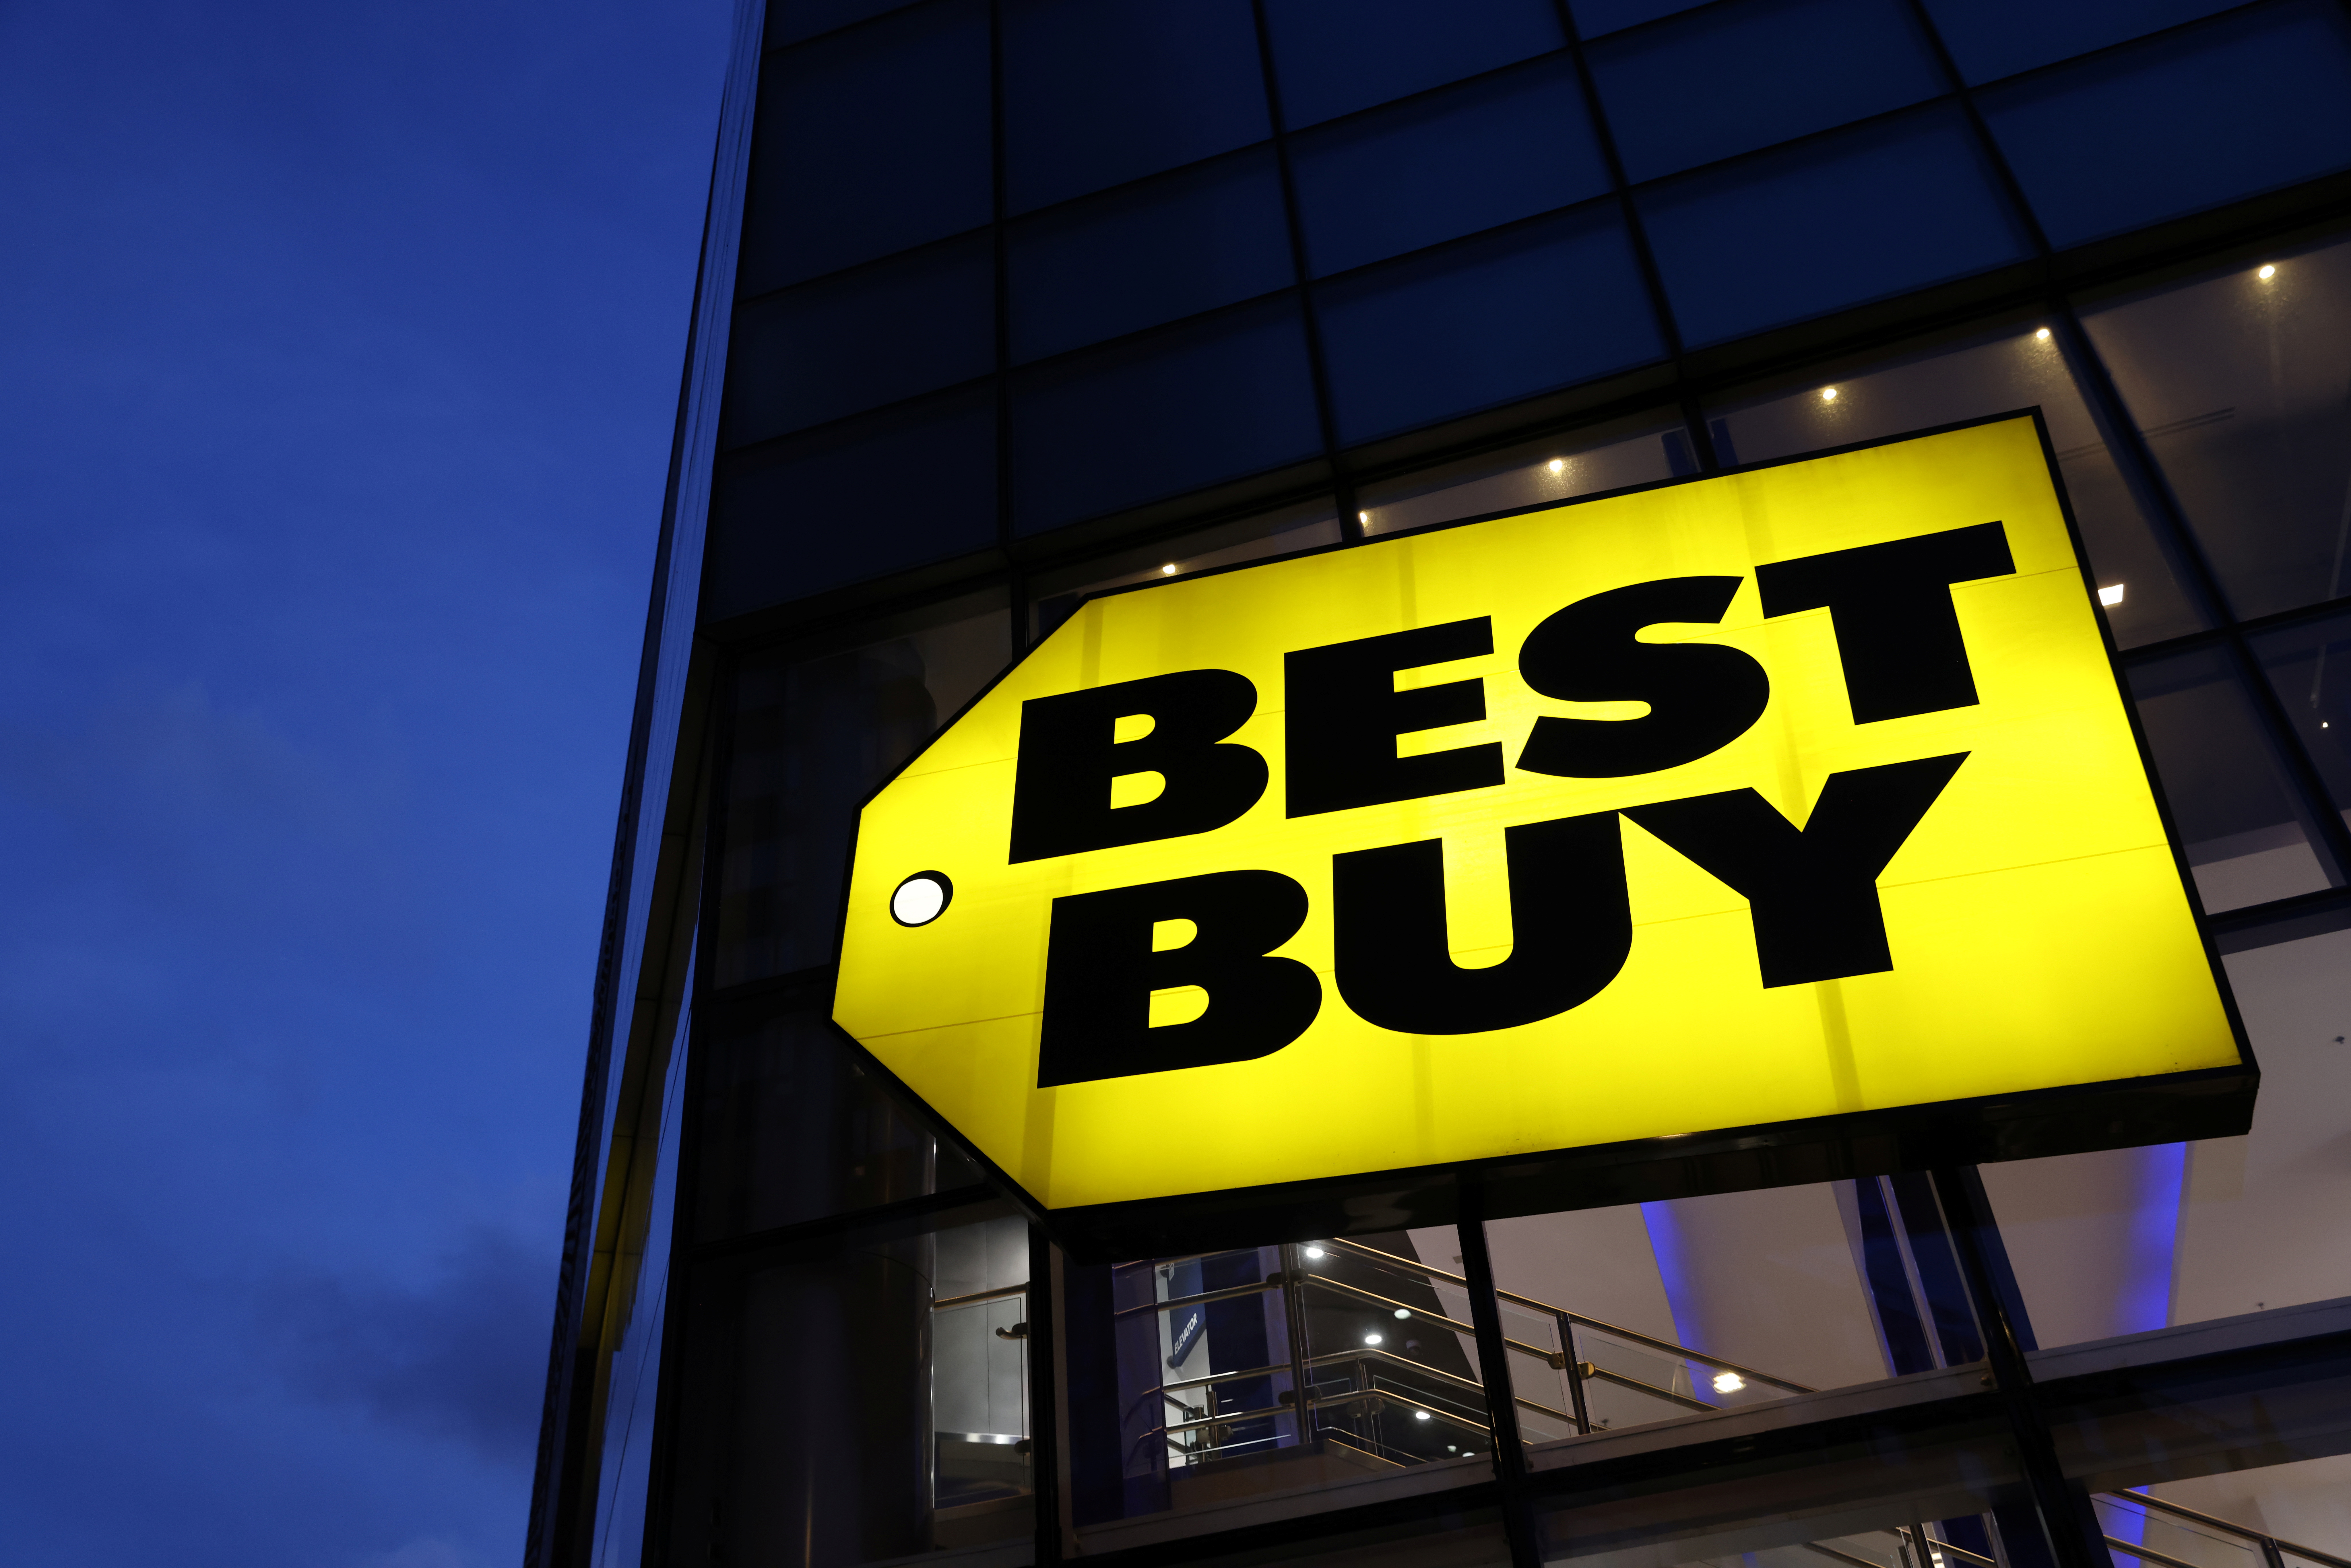 The Best Buy logo is seen at a store in Manhattan, New York City